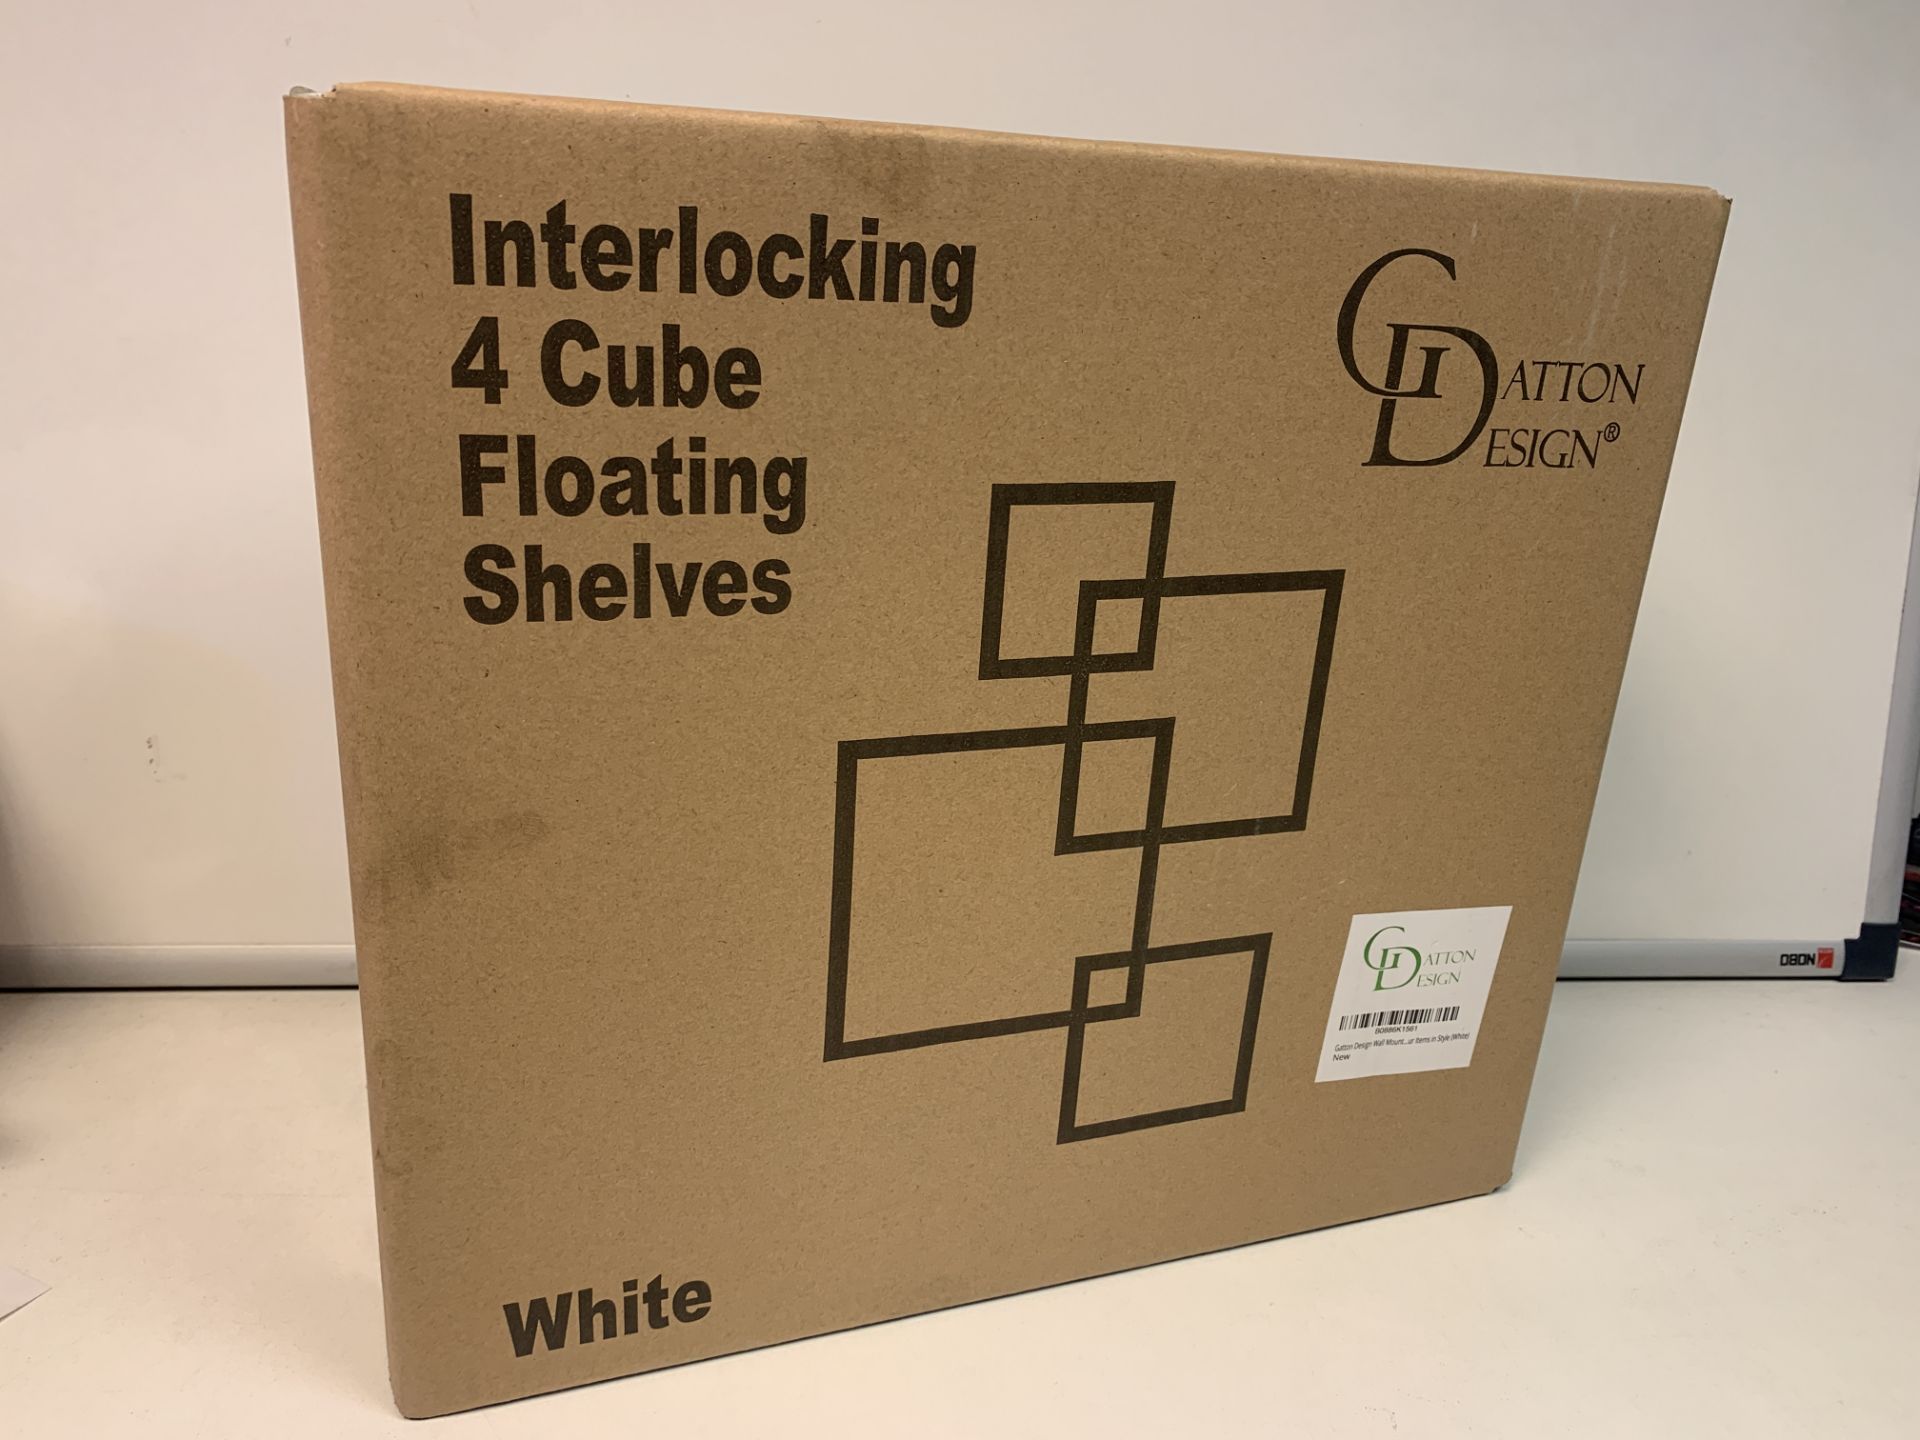 PALLET TO CONTAIN 72 X NEW BOXED SETS OF GATTON DESIGN INTERLOCKING 4 CUBE FLOATING SHELVES IN